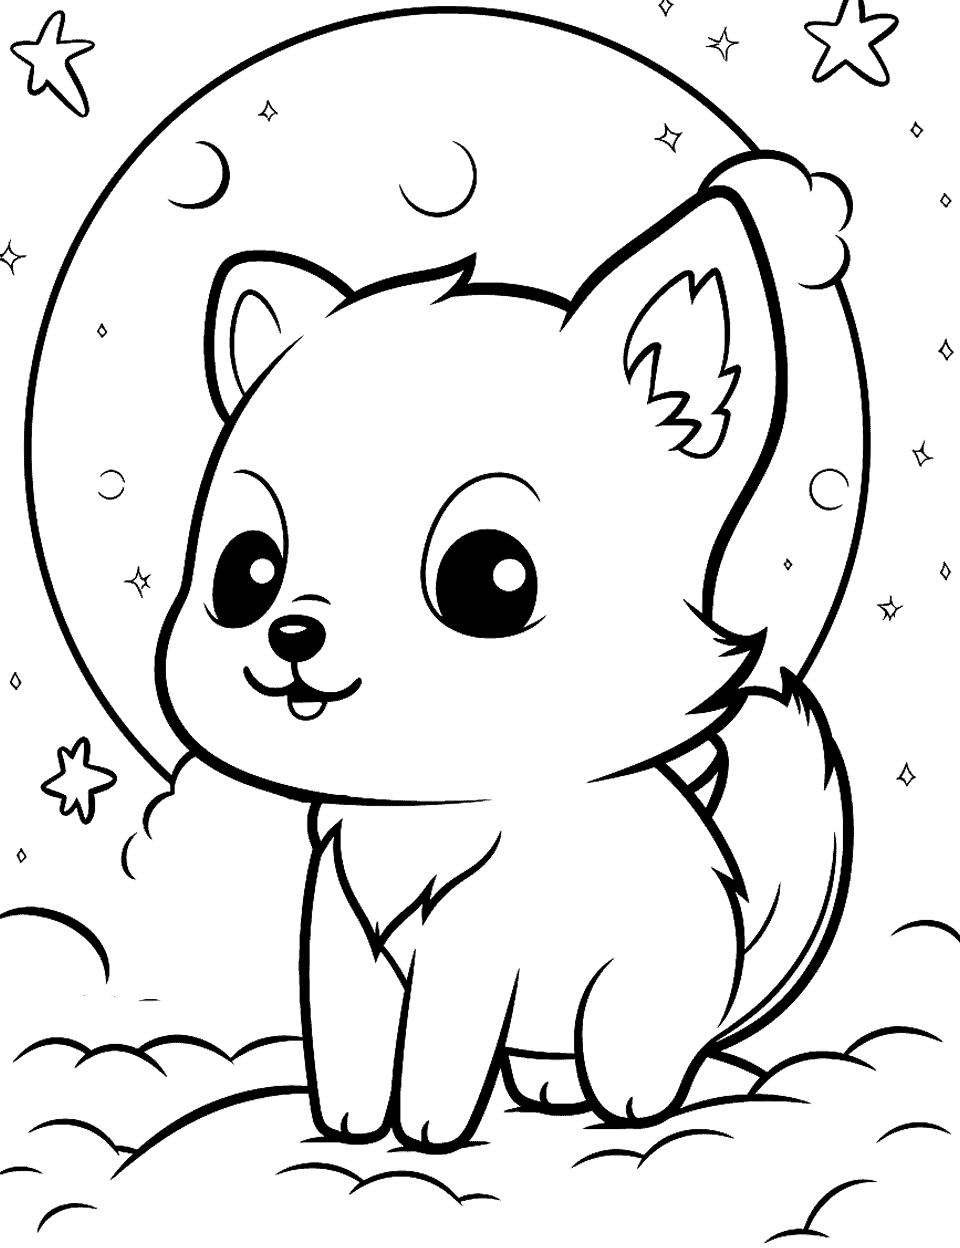 Wolf's Moonlight Stroll Kawaii Coloring Page - A cute Kawaii wolf taking a peaceful stroll under the moonlight.